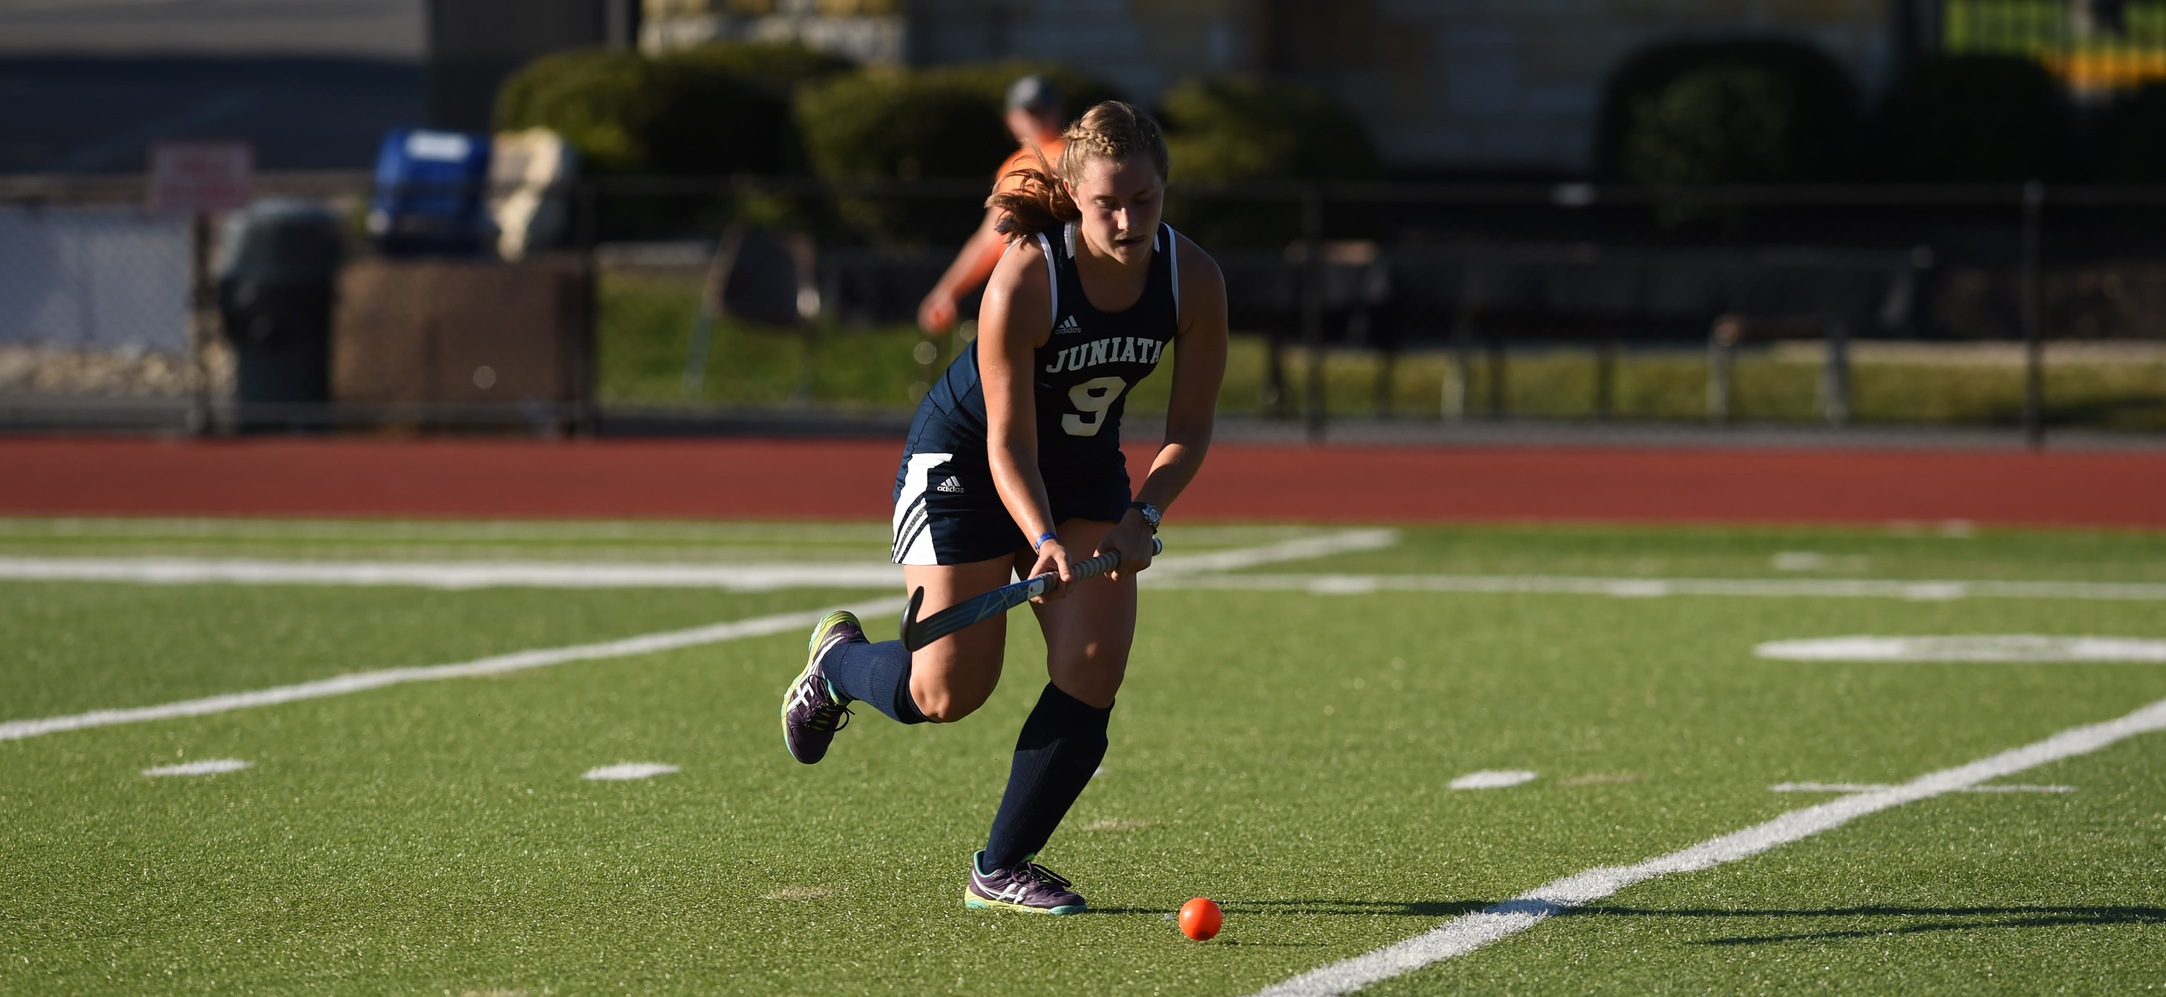 Meredith Shephard scored the lone goal for the Eagles in their first win of the season.